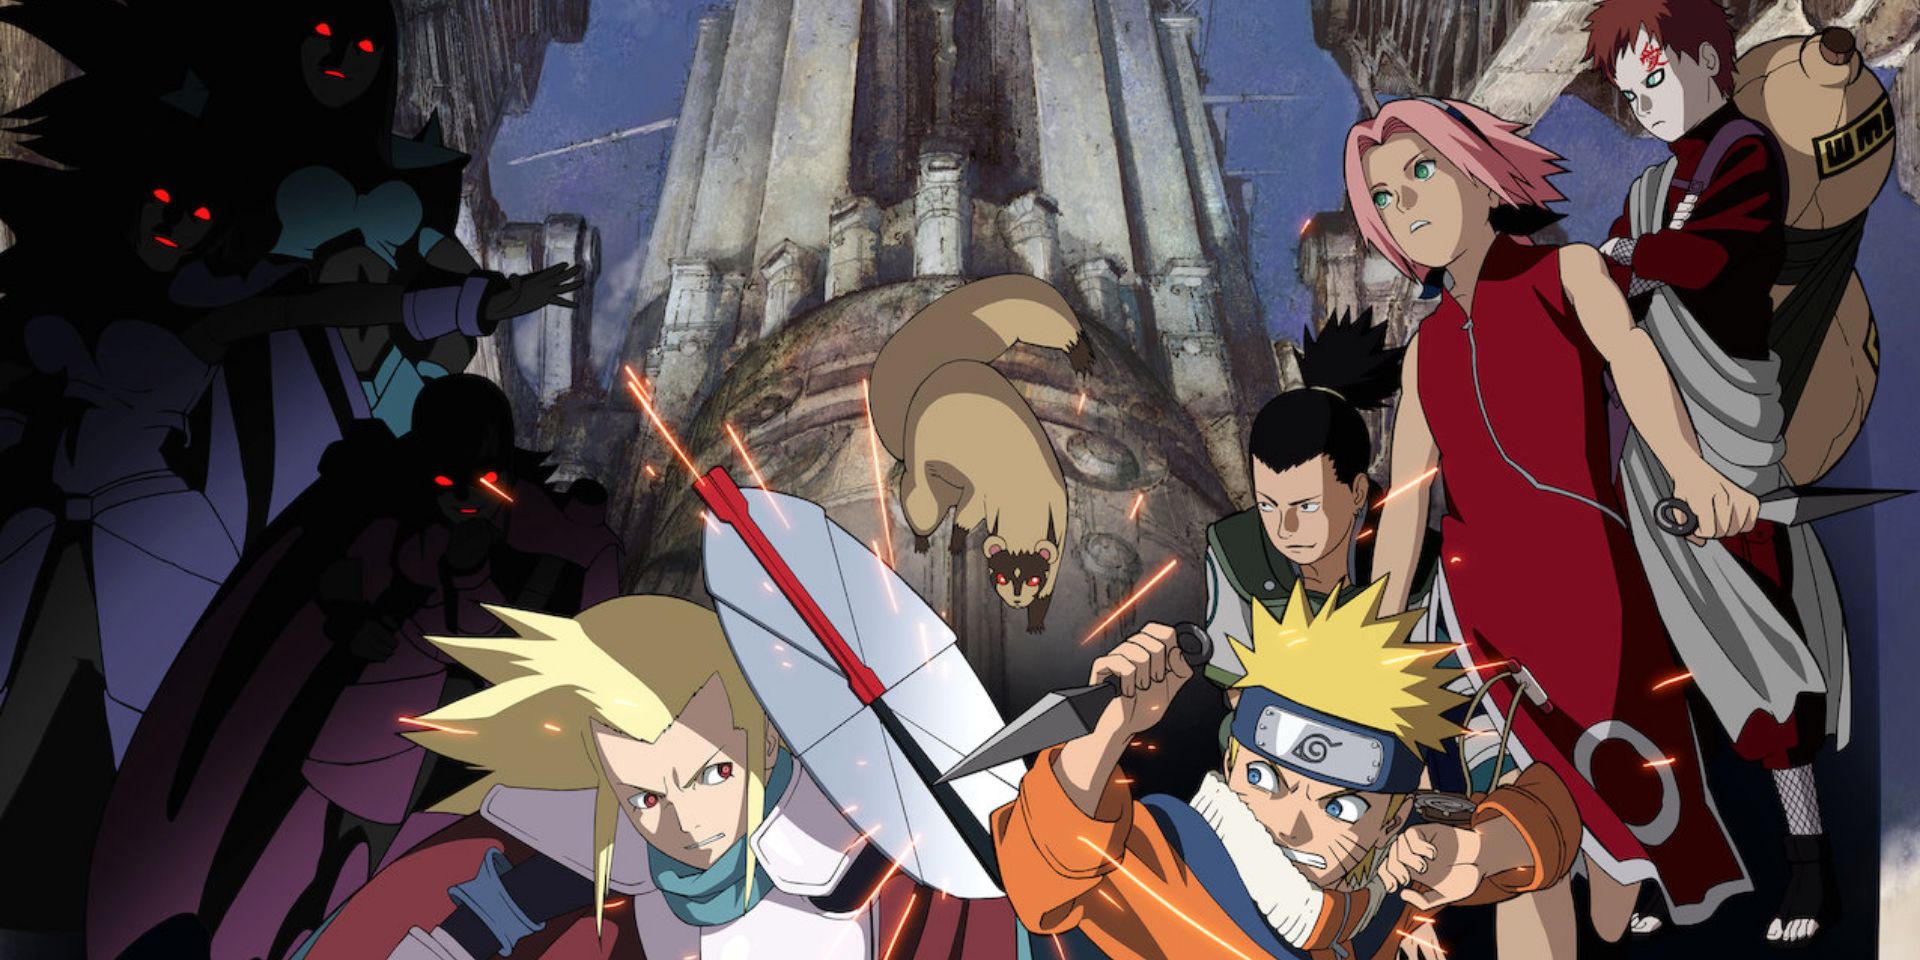 Naruto The Movie Legend Of The Stone Of Gelel